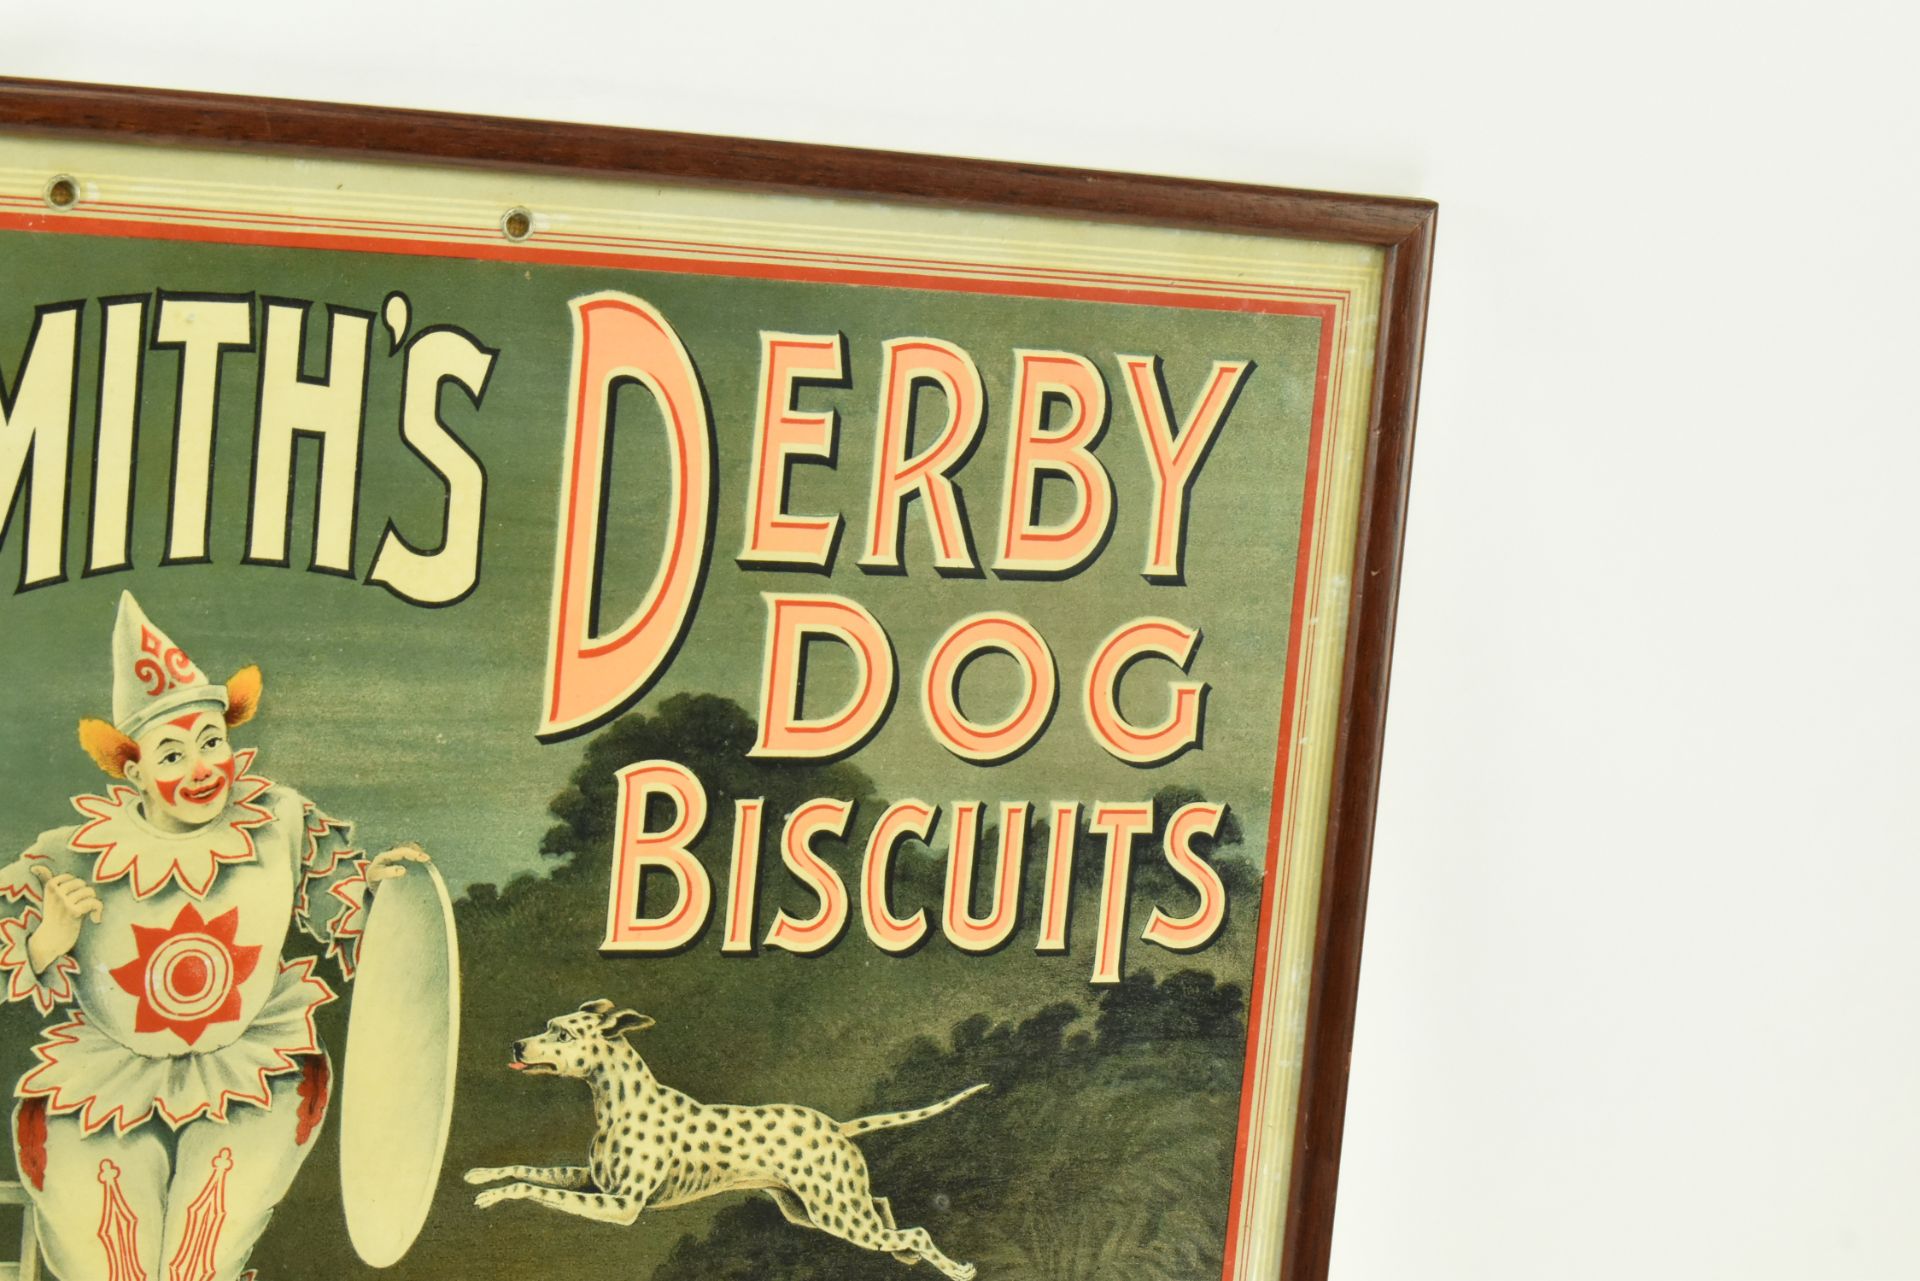 VINTAGE ADVERTISING - GREENSMITH'S DERBY DOG BISCUITS CARD - Image 4 of 7